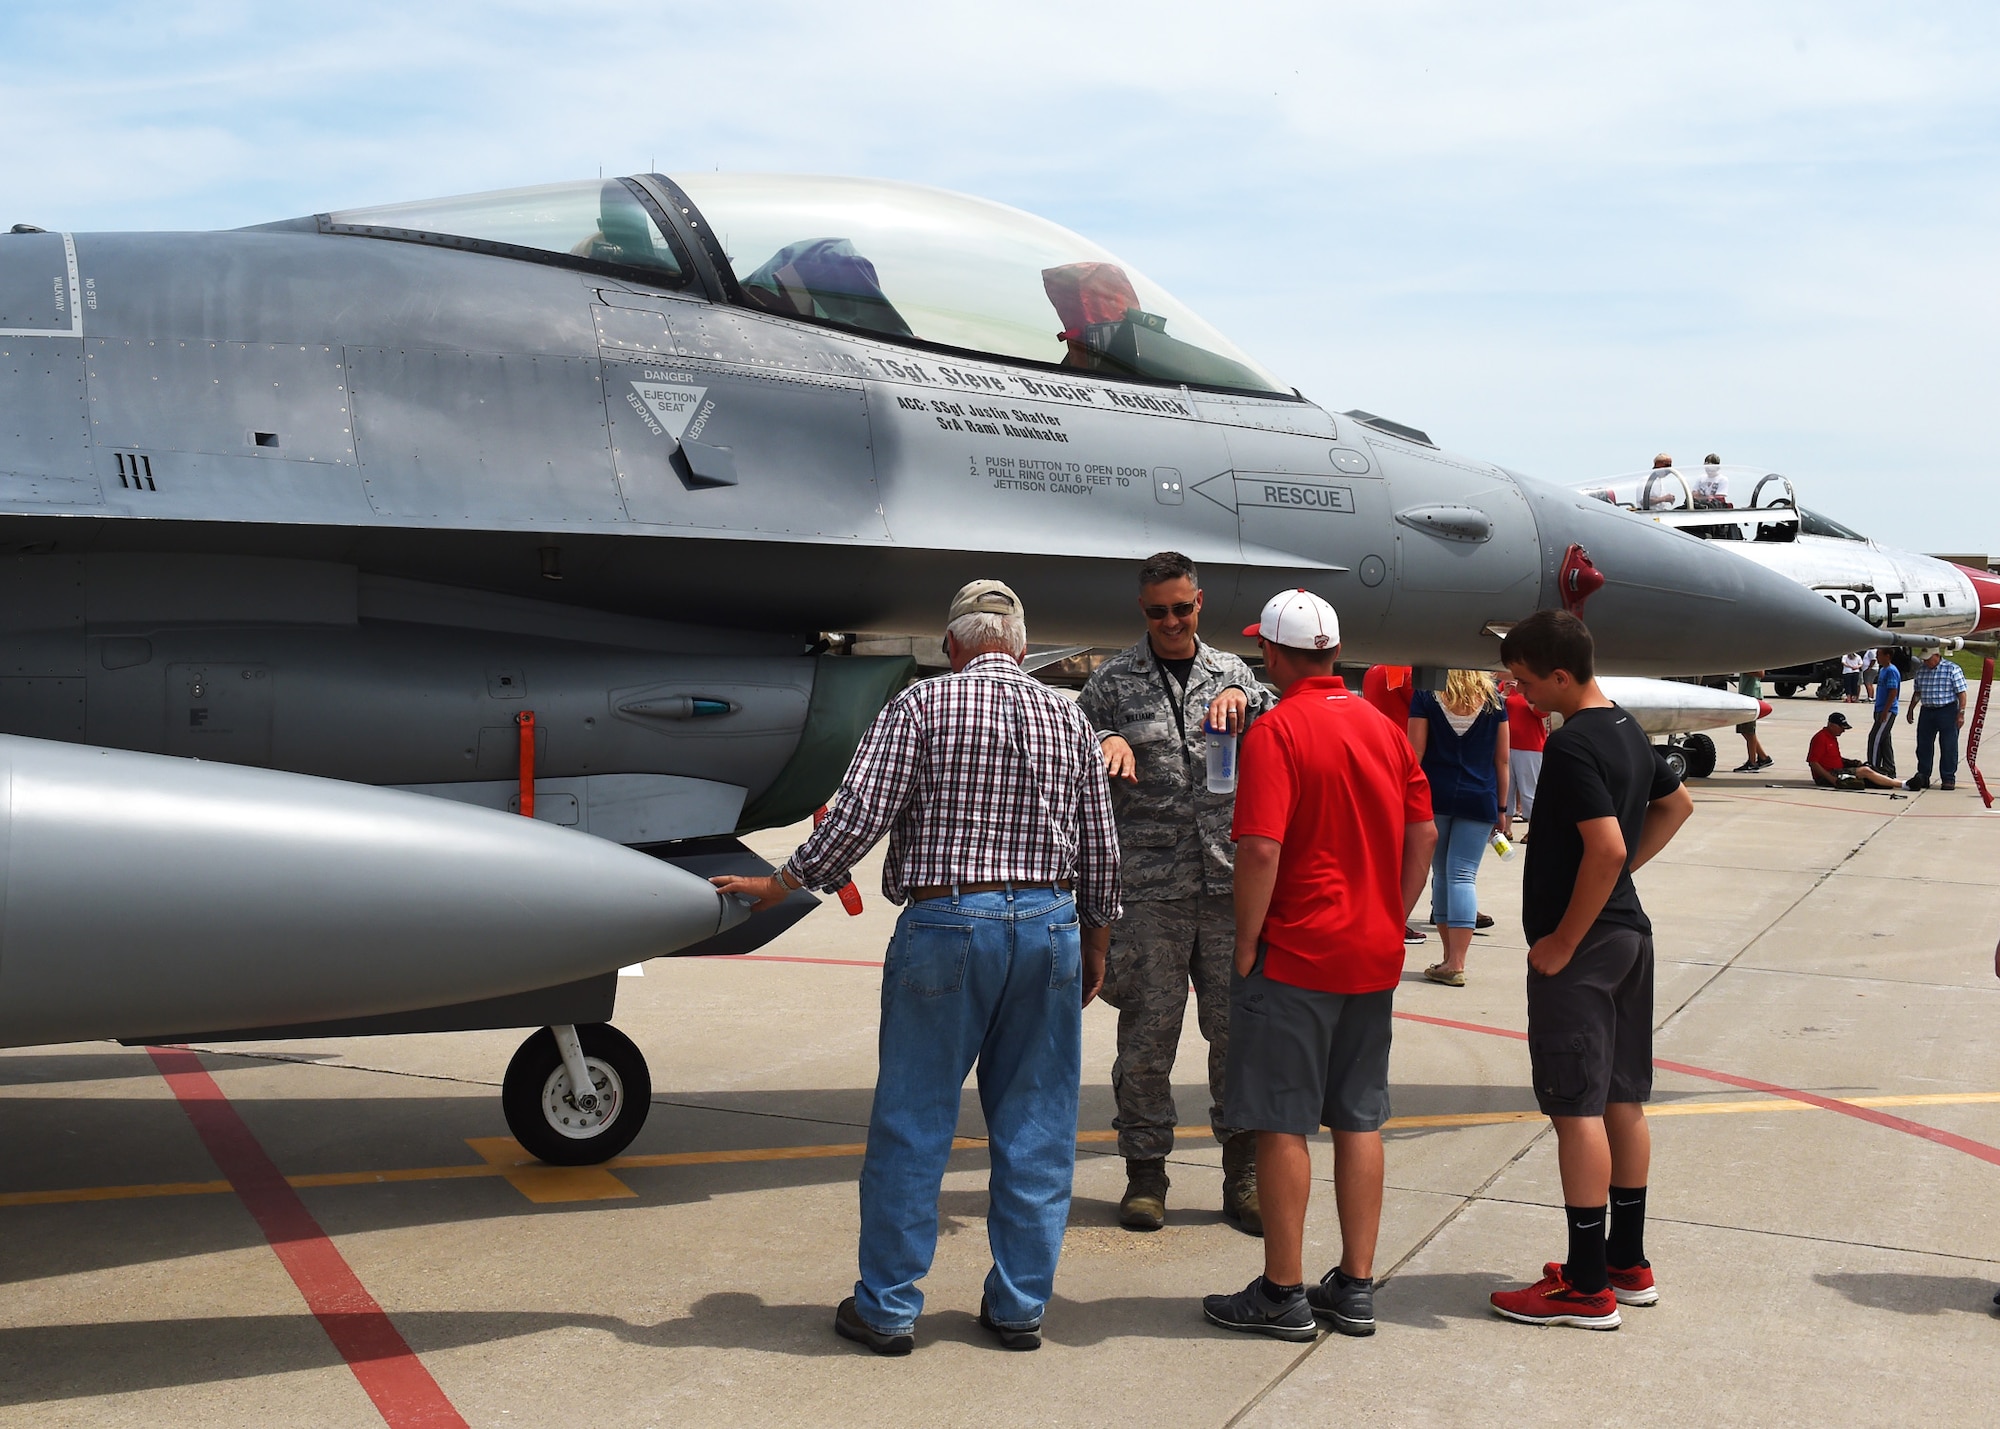 Current members and alumni of the 132d Wing participate in the wing's 75th Anniversary celebration June 11, 2016, at the 132d Wing in Des Moines, Iowa. The celebration featured aircraft displays, bouncey houses,The Sidewinders Army rock band and numerous vendors. (U.S. Air National Guard photo by Staff Sgt. Michael J. Kelly/Released)